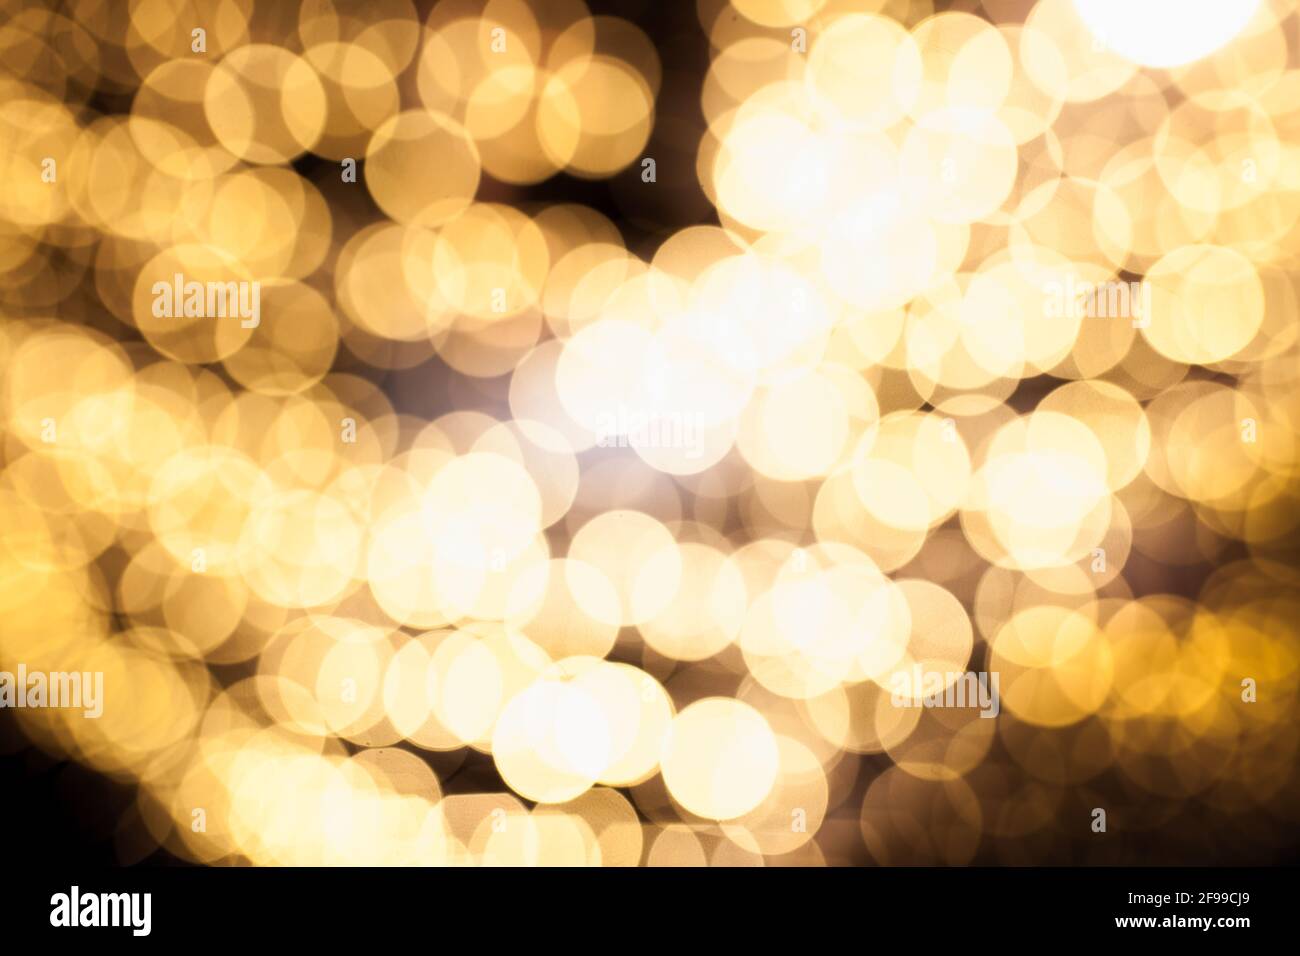 Warm lighting for party or Christmas with lens flares and blur, template Stock Photo